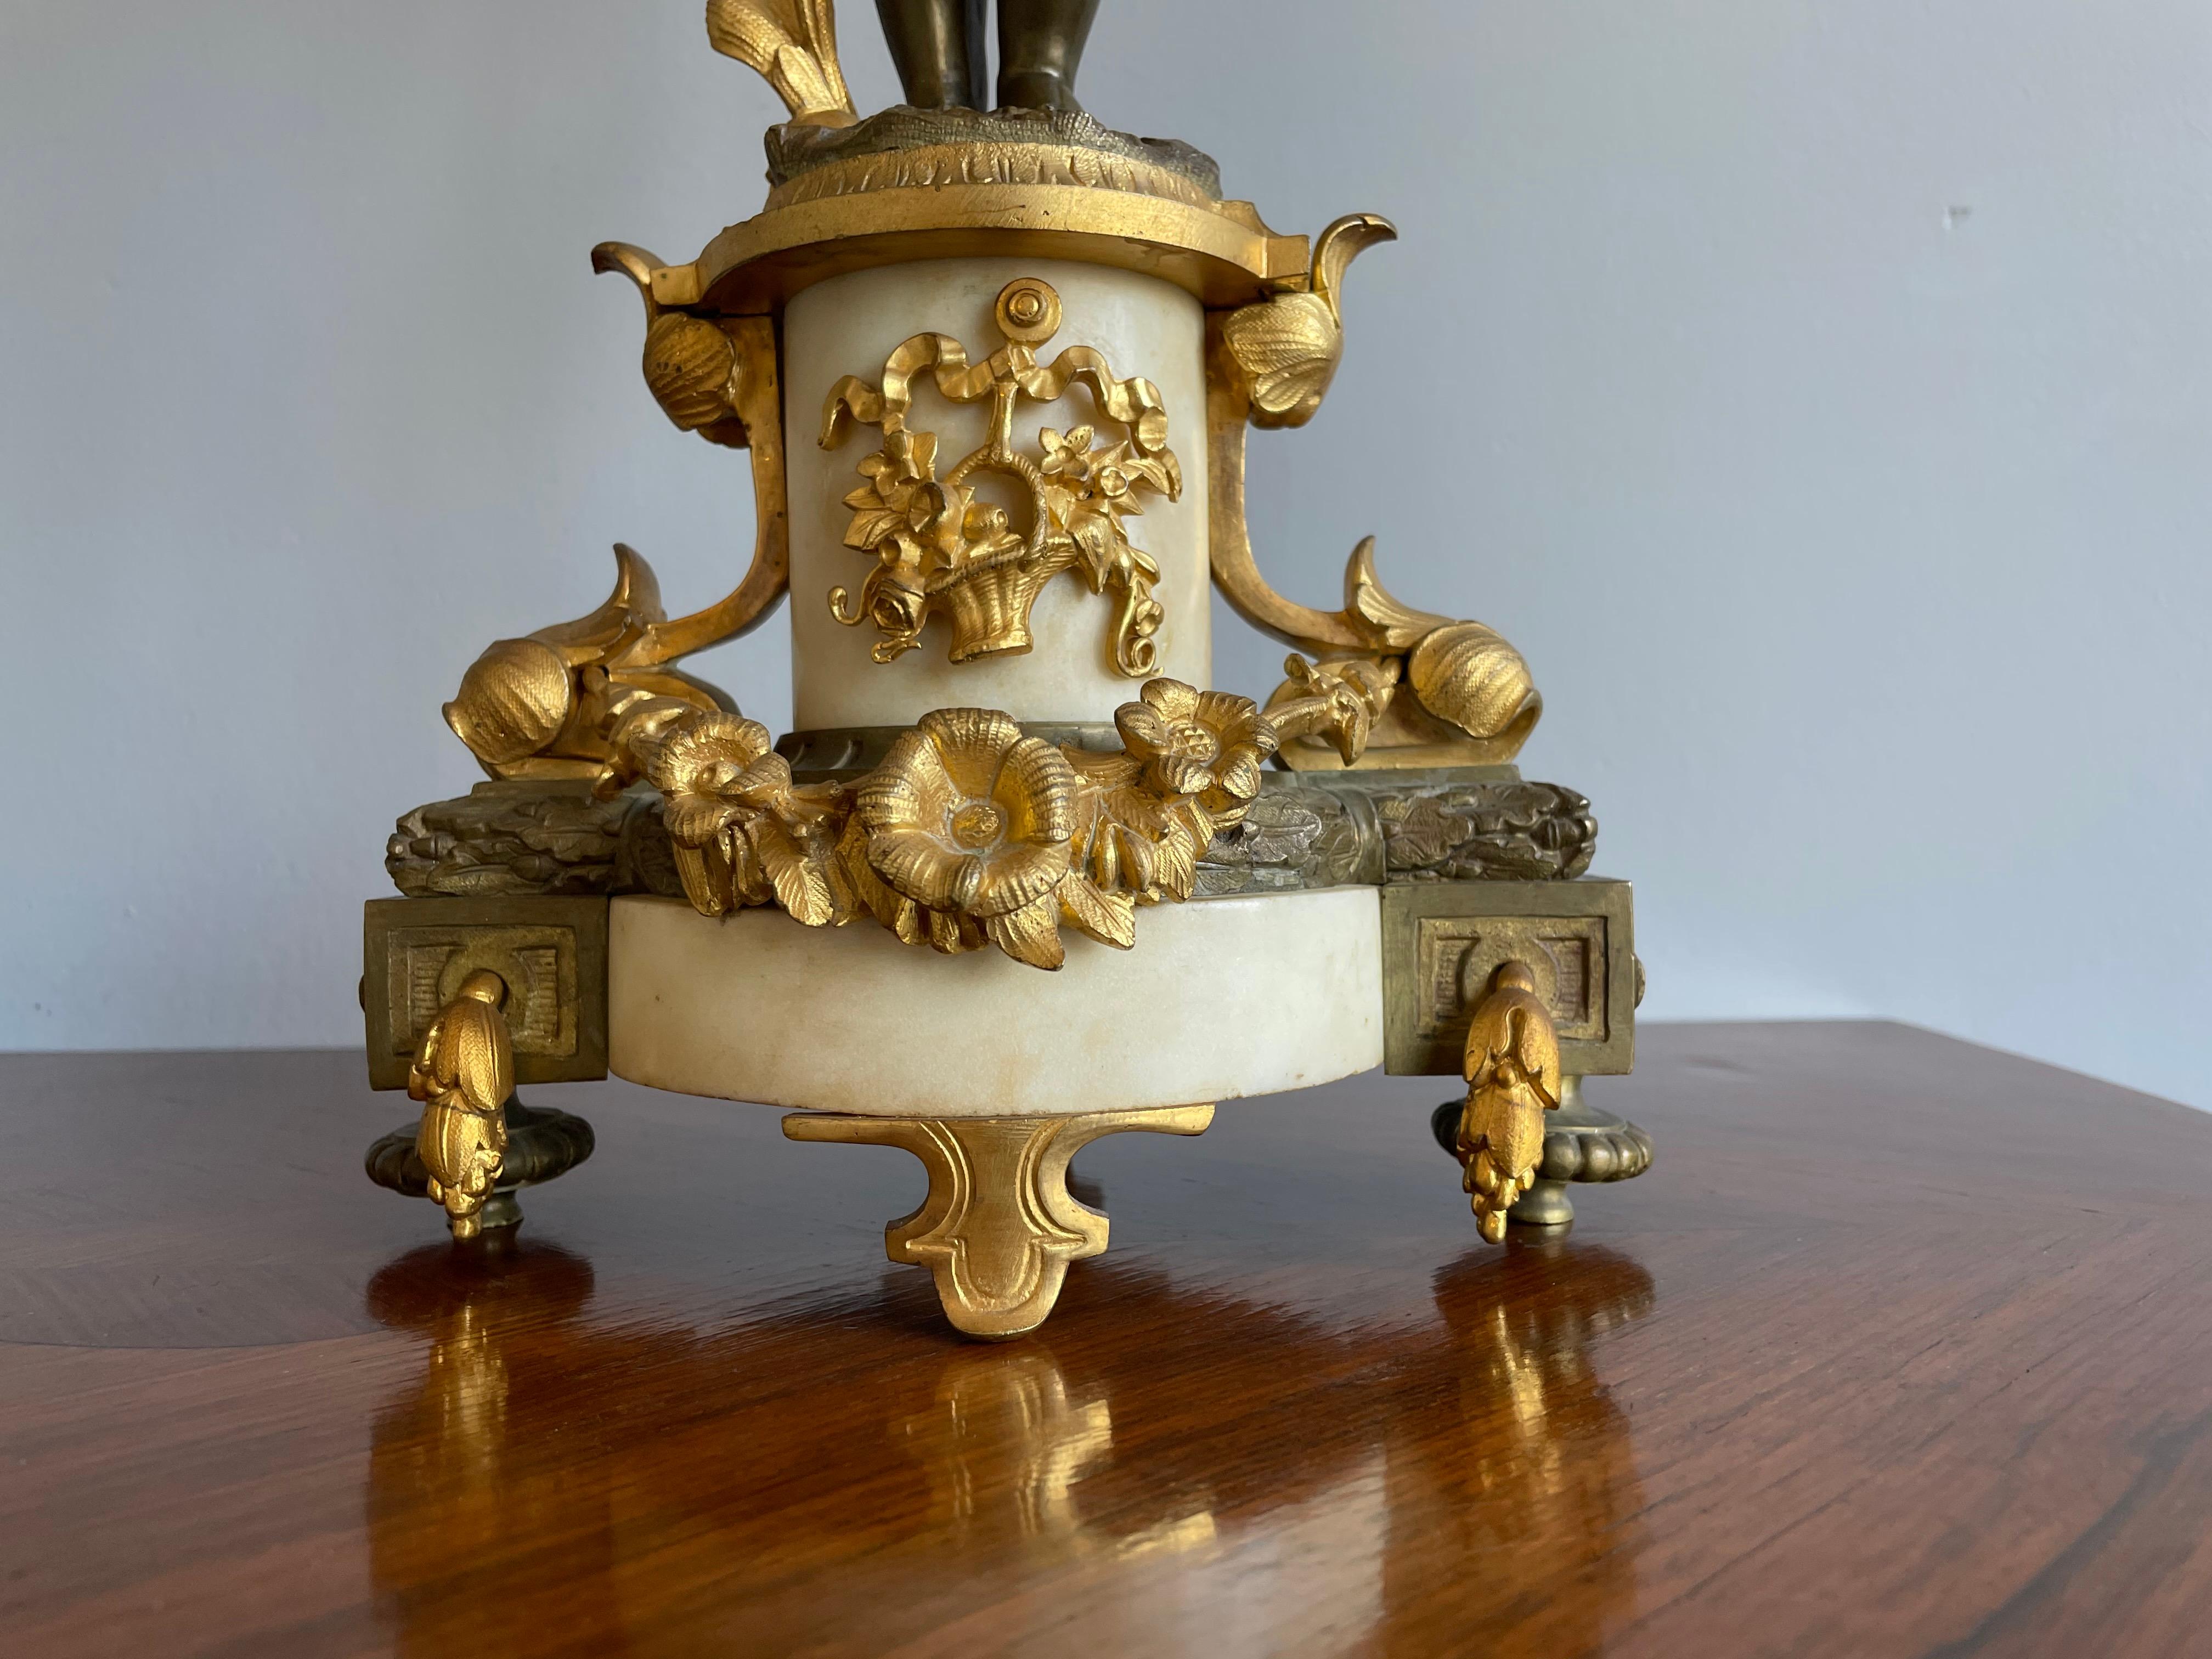 Stunning Pair of French Louis XVI Style Gilt Bronze & Marble Candle Candelabras For Sale 4